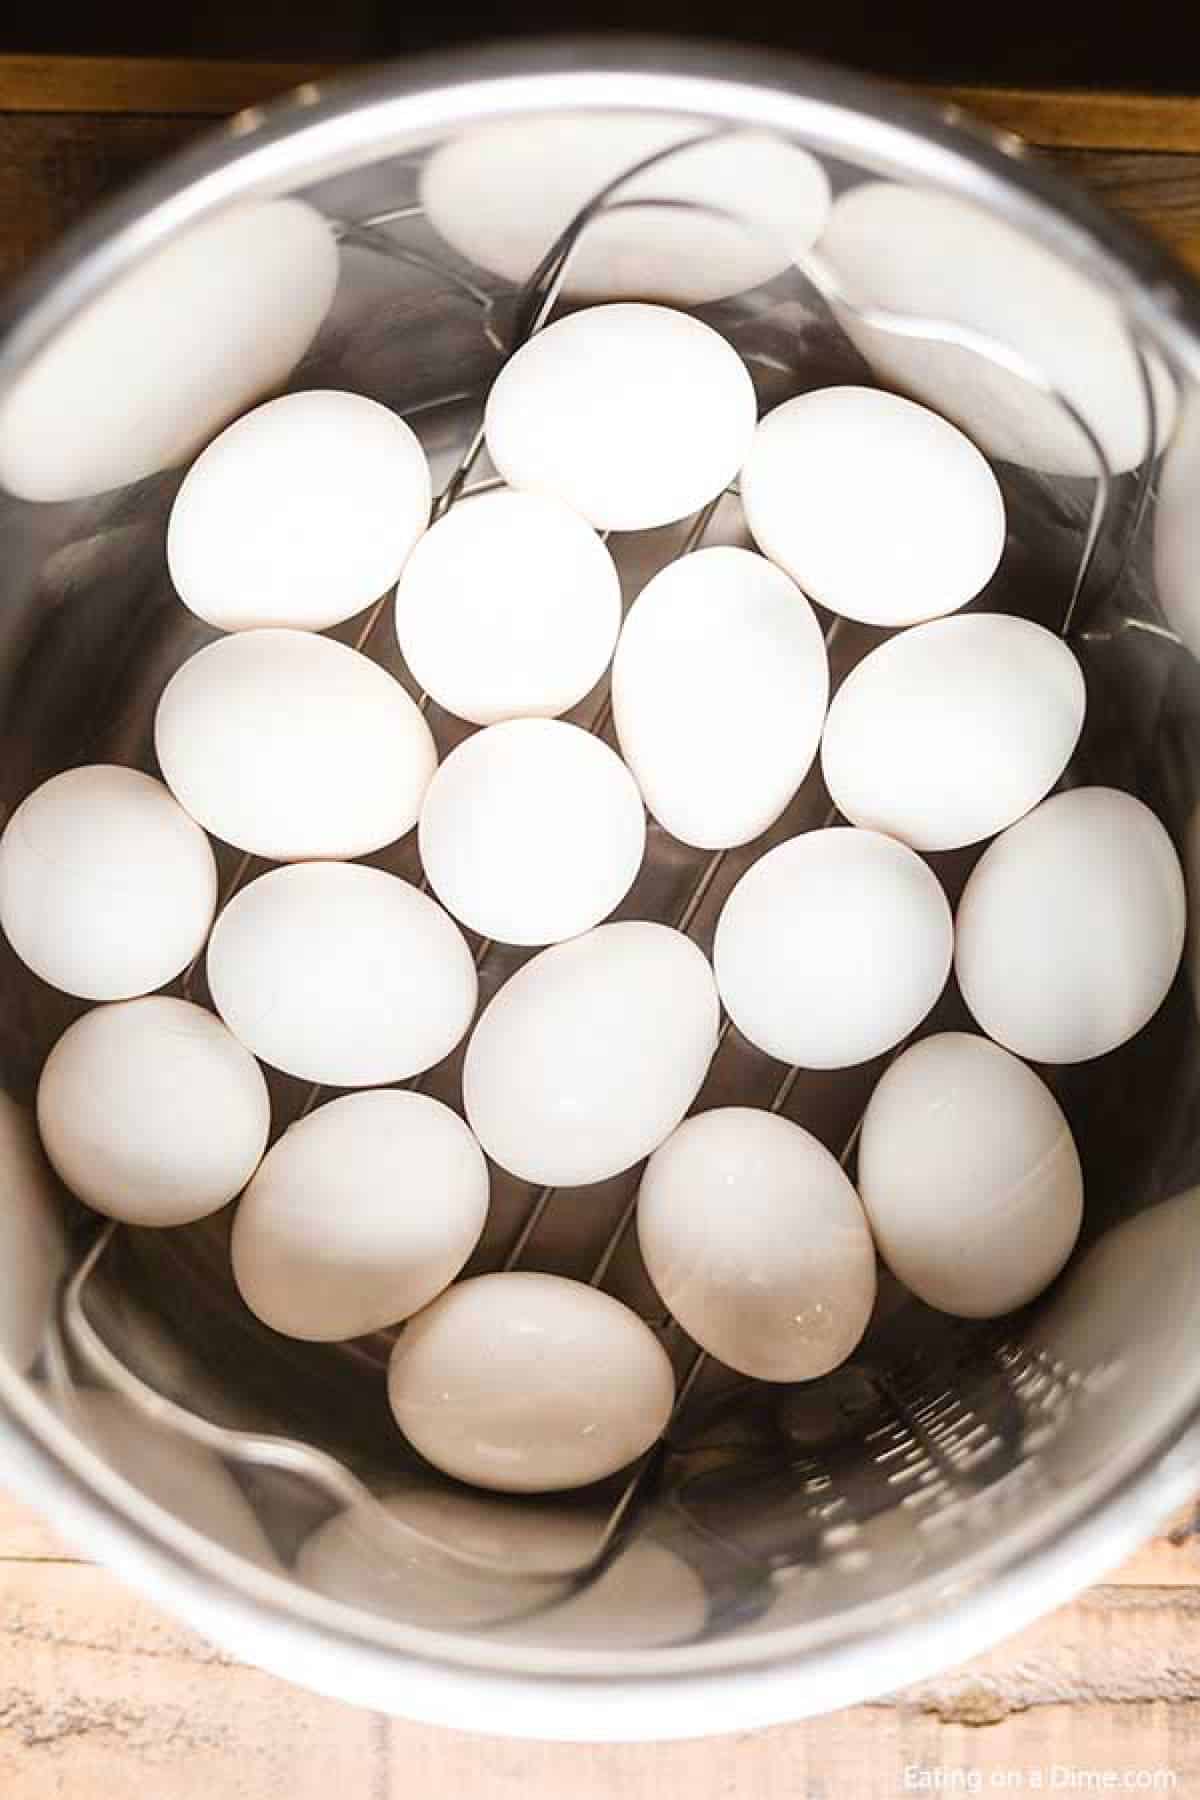 Eggs in the instant pot basket in the pressure cooker